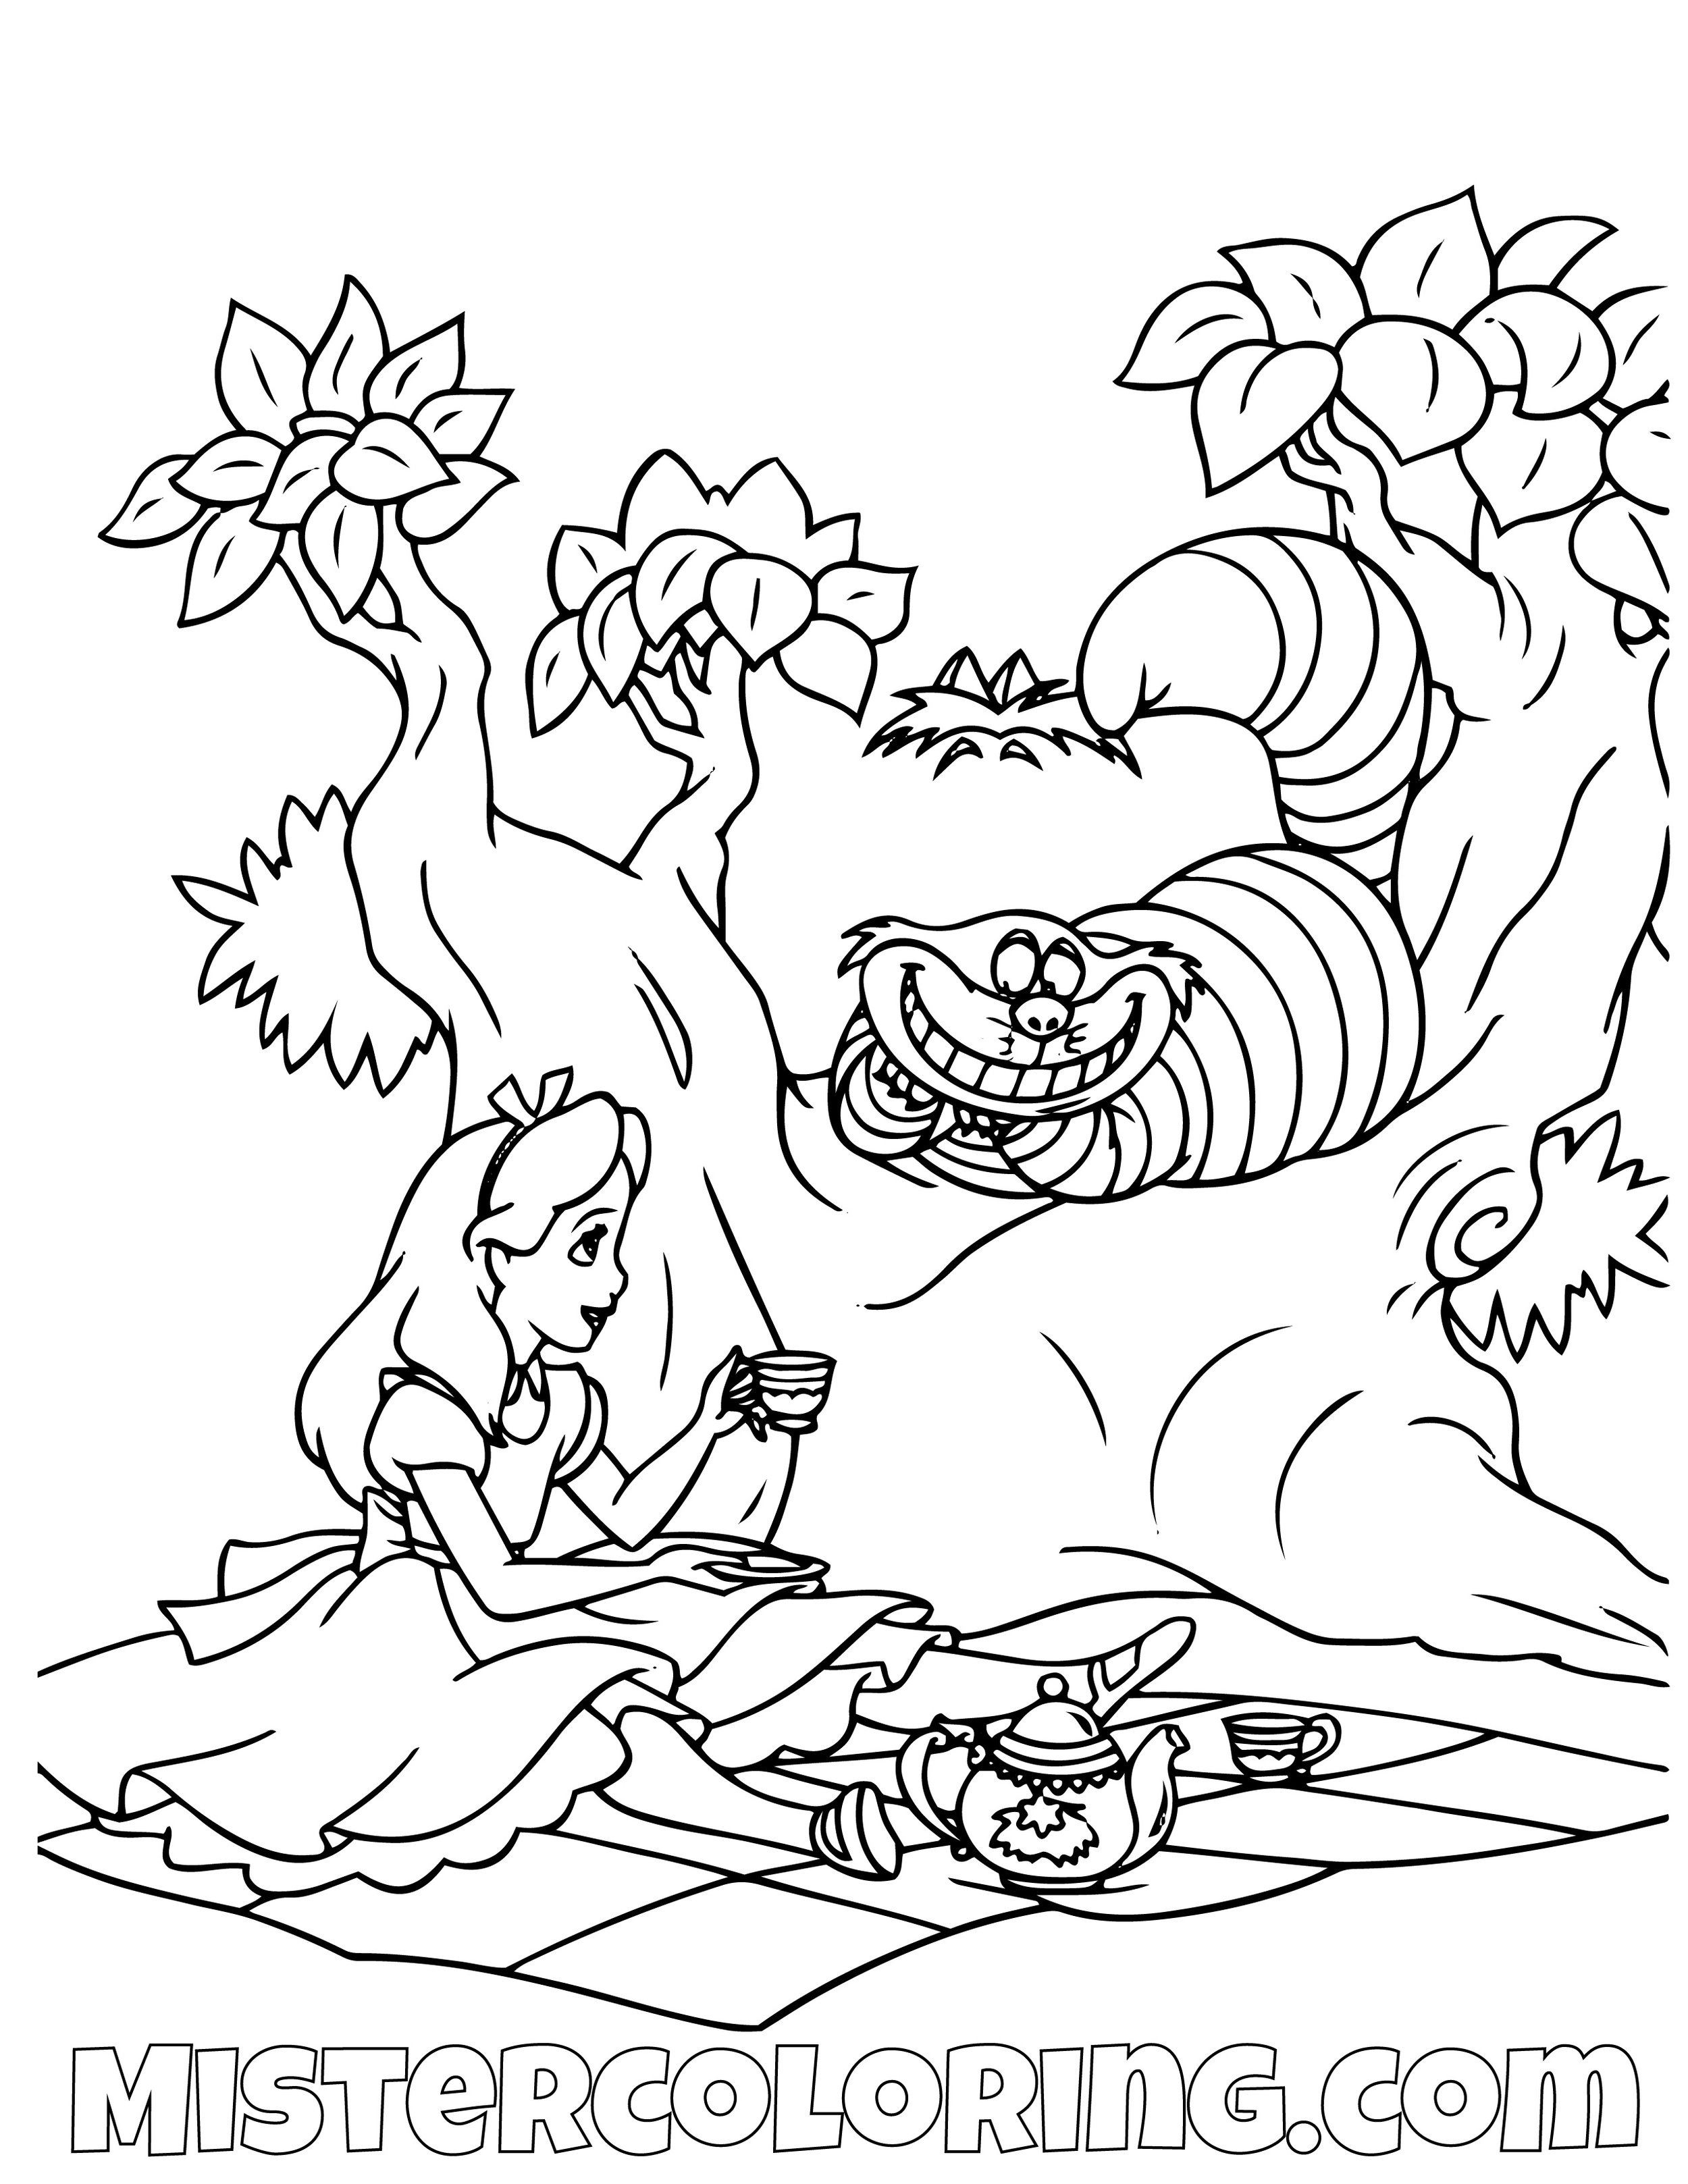 Alice In Wonderland Caterpillar Coloring Pages | crowid